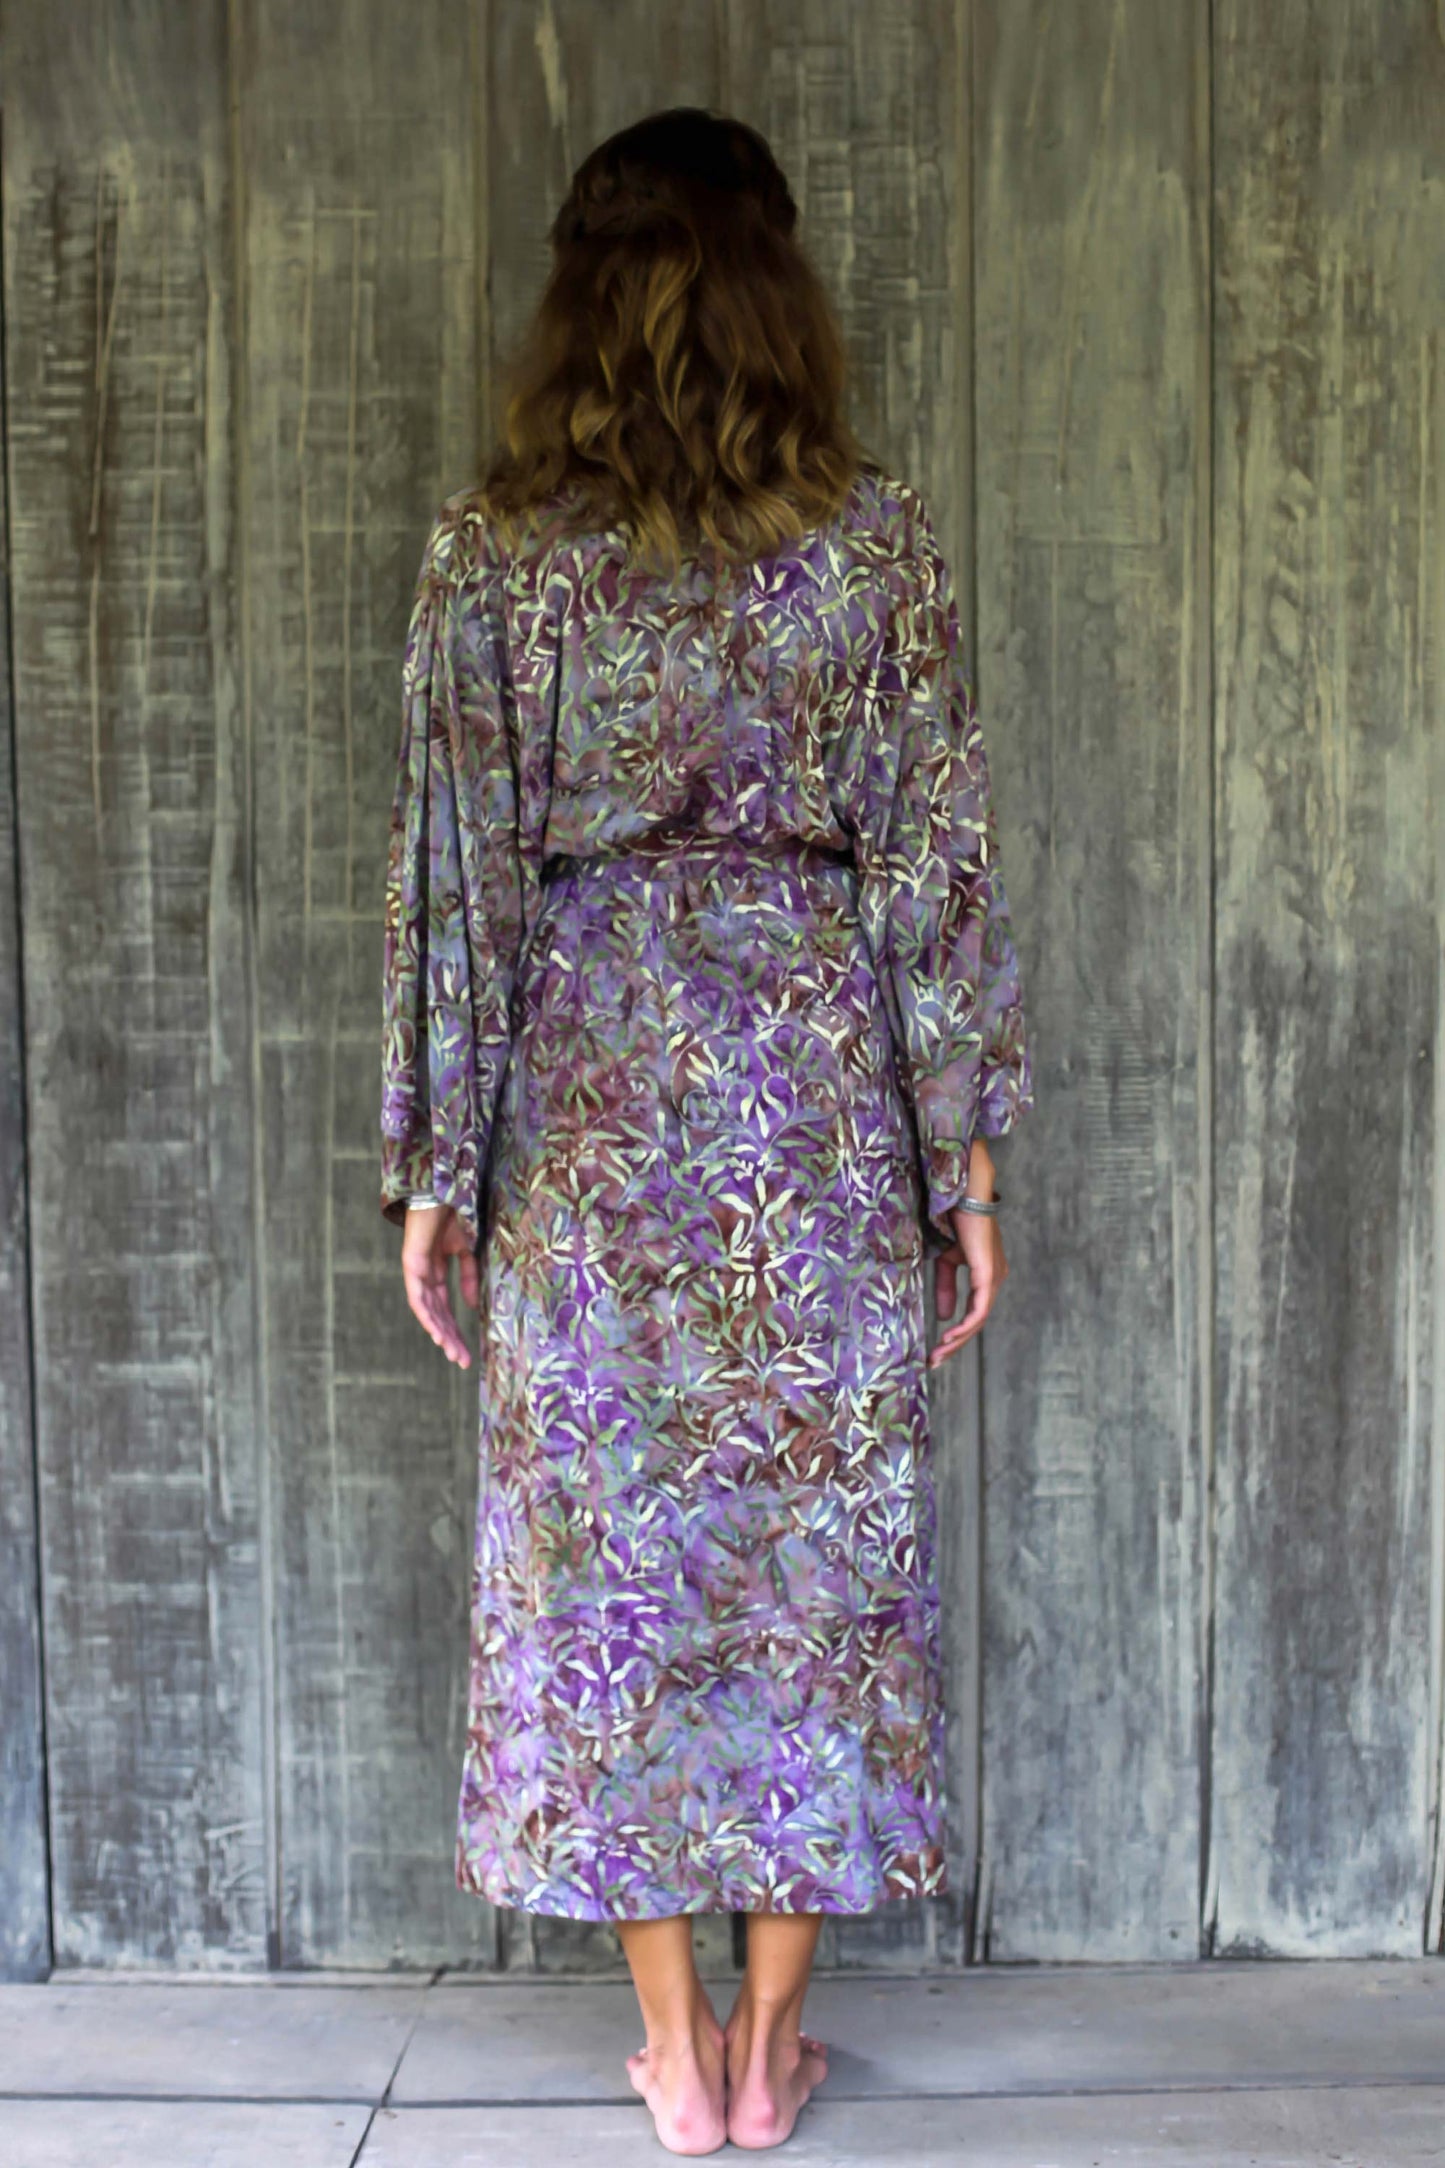 Floral Mansion Sienna Purple Floral Batik on Rayon Long Robe from Indonesia